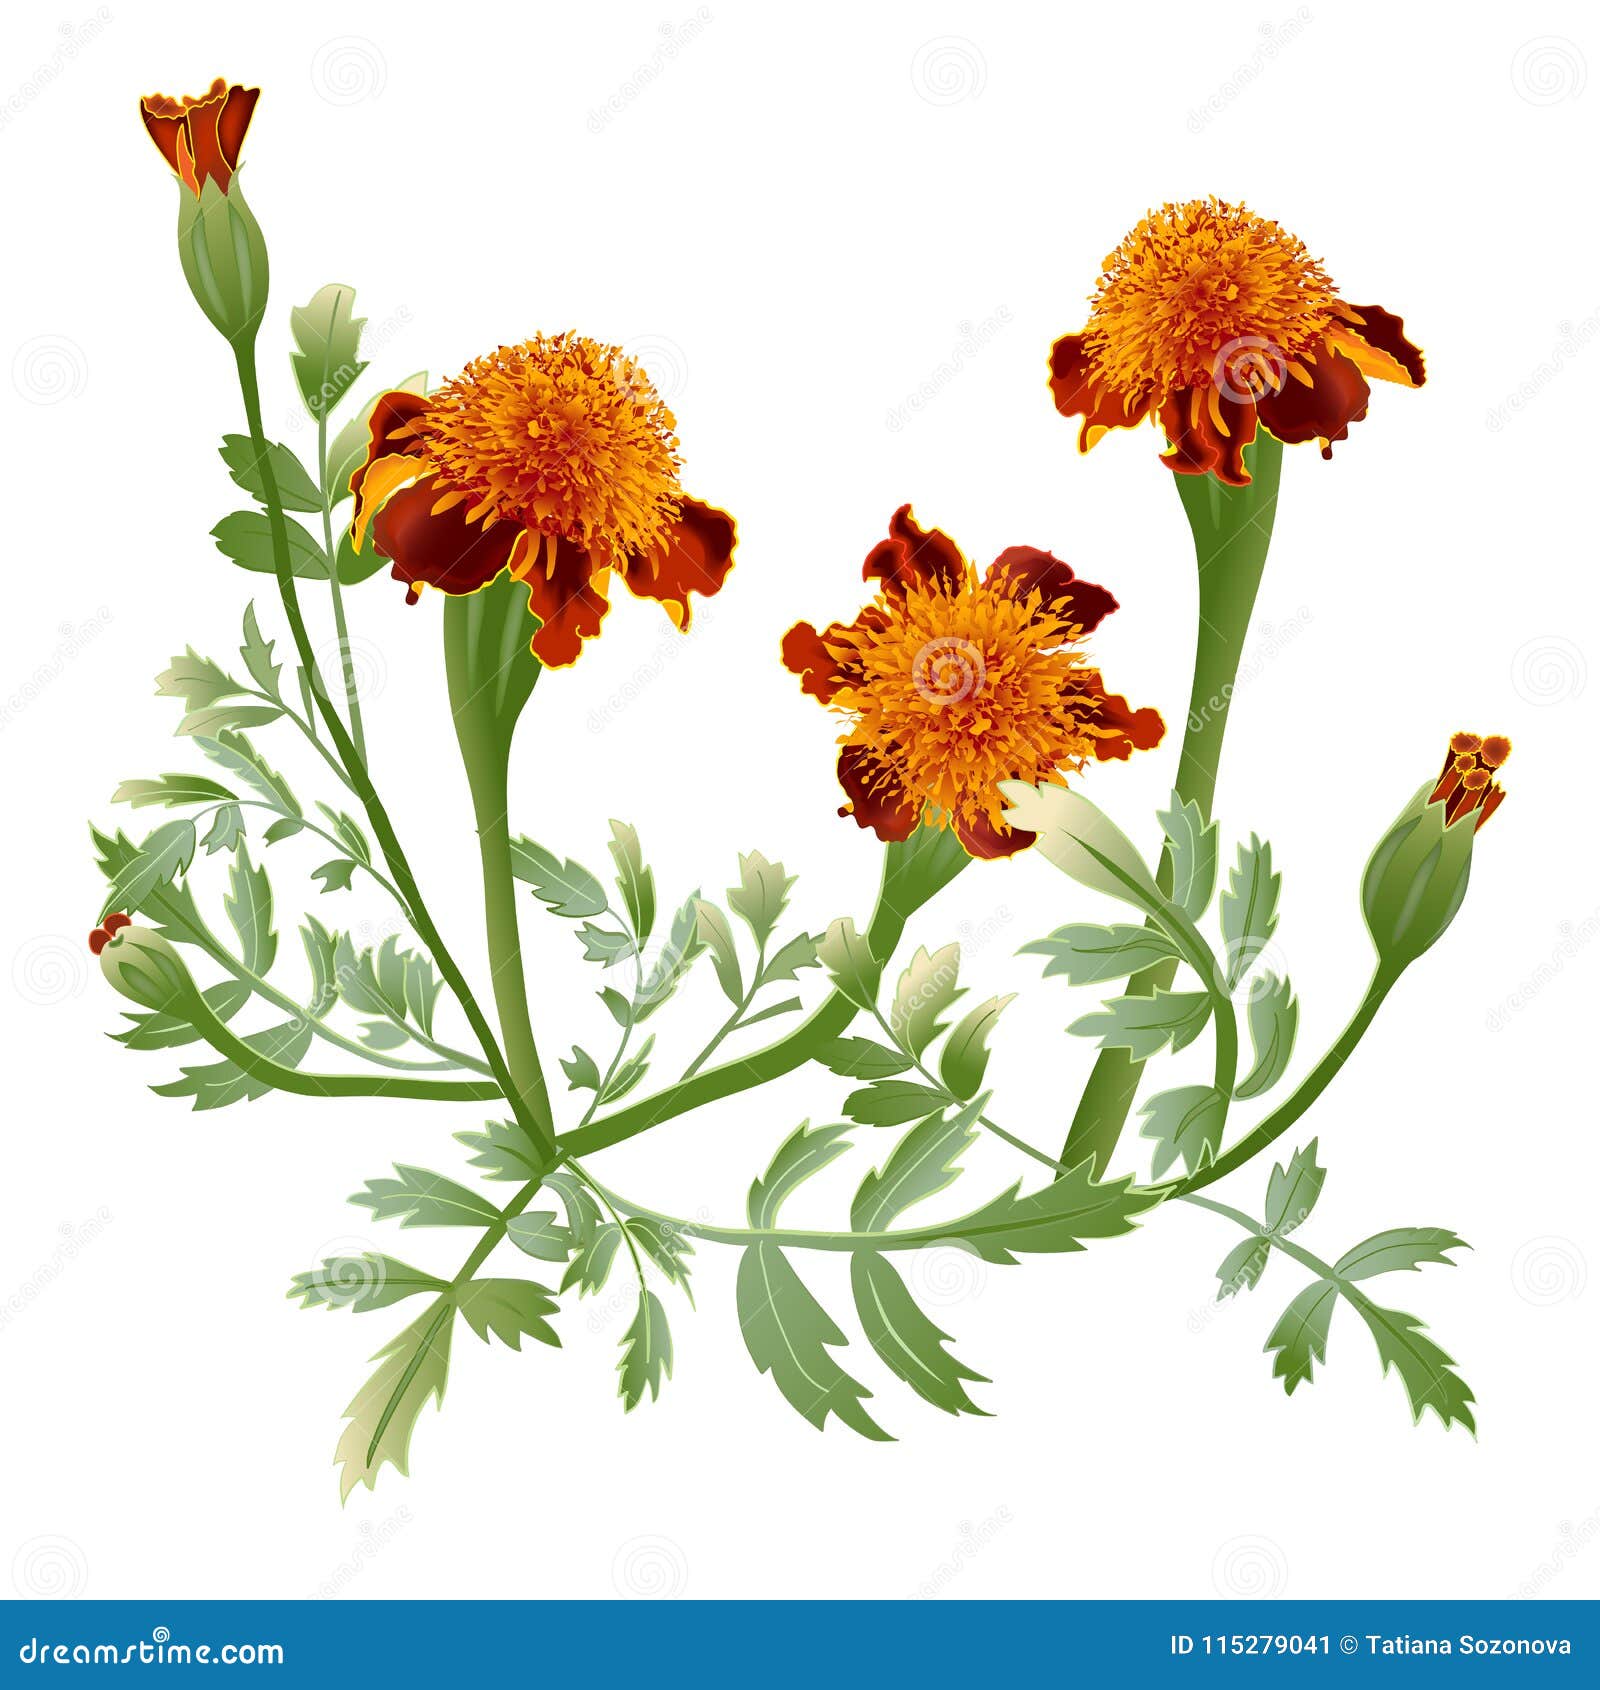 How To Draw A Marigold Flower Step By Step